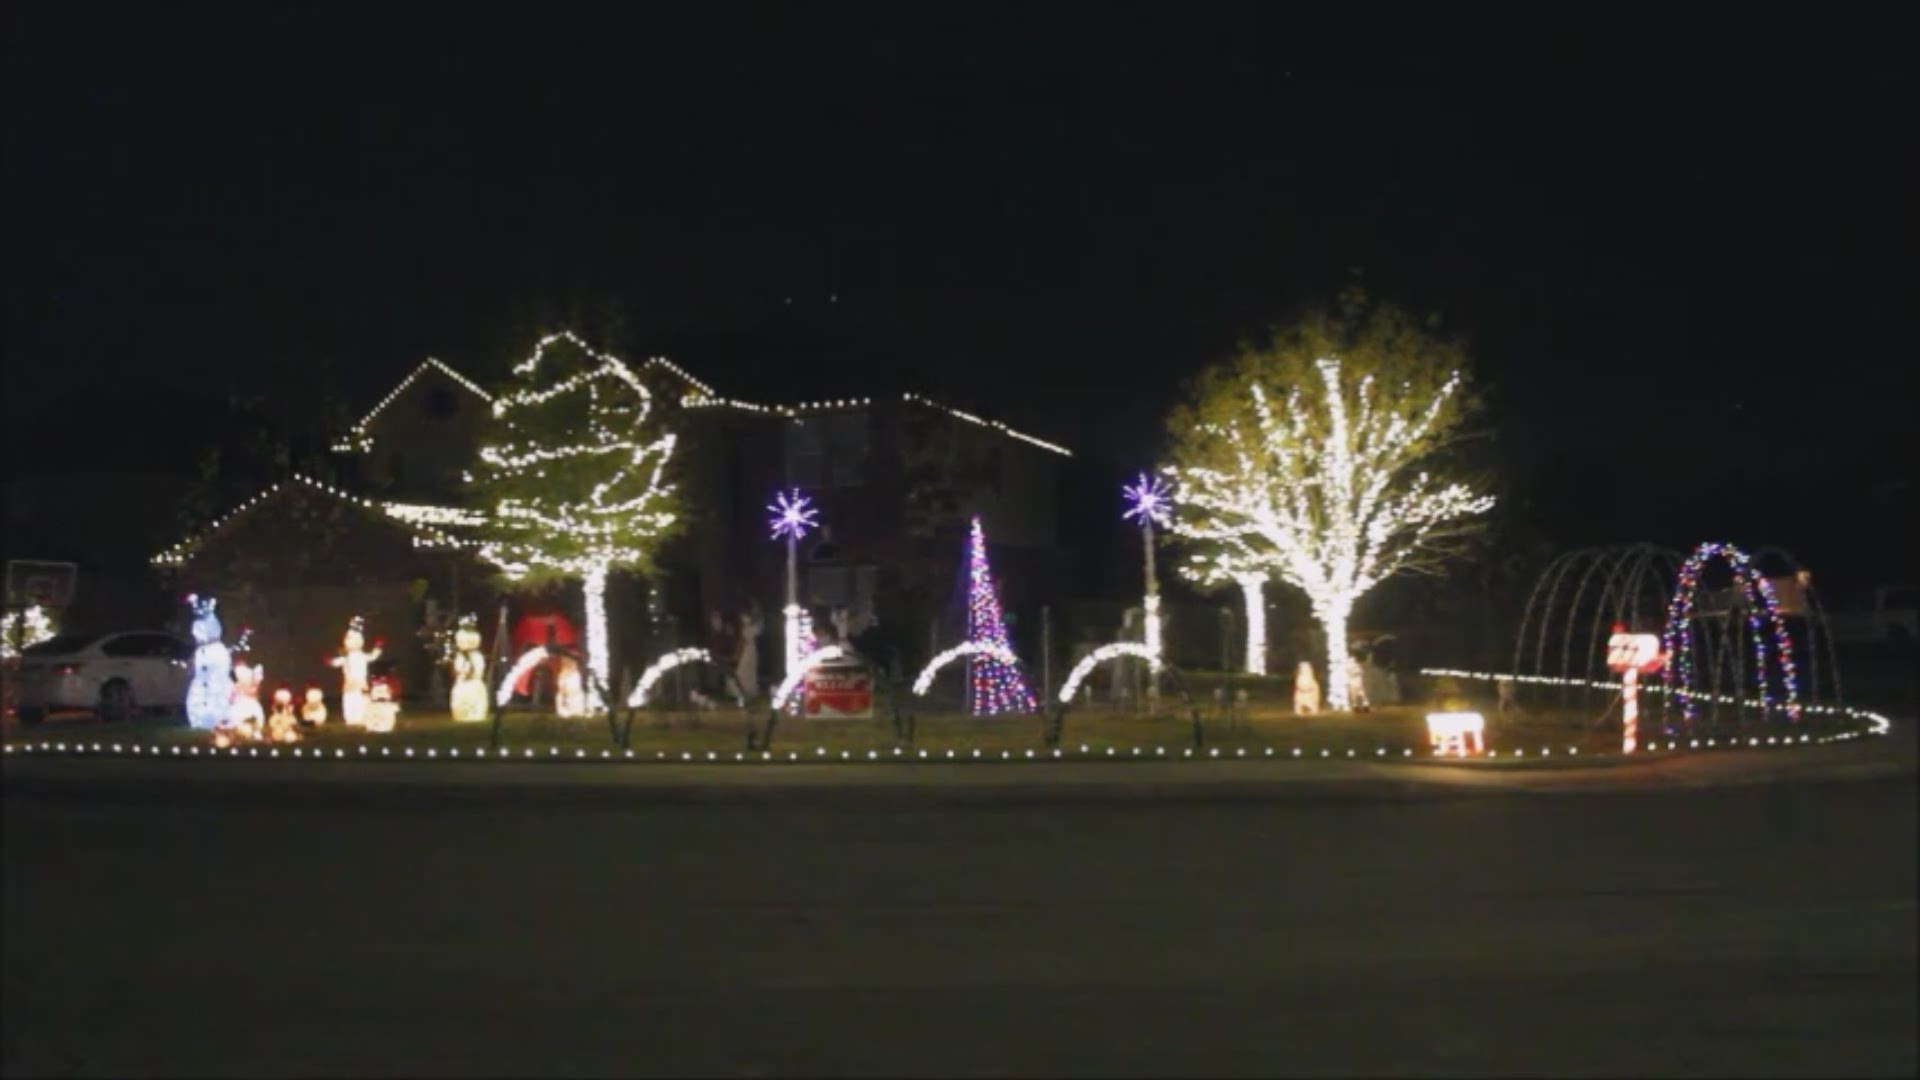 Remember Me song from Coco featured in Christmas Lights Show in Boerne, Tx.